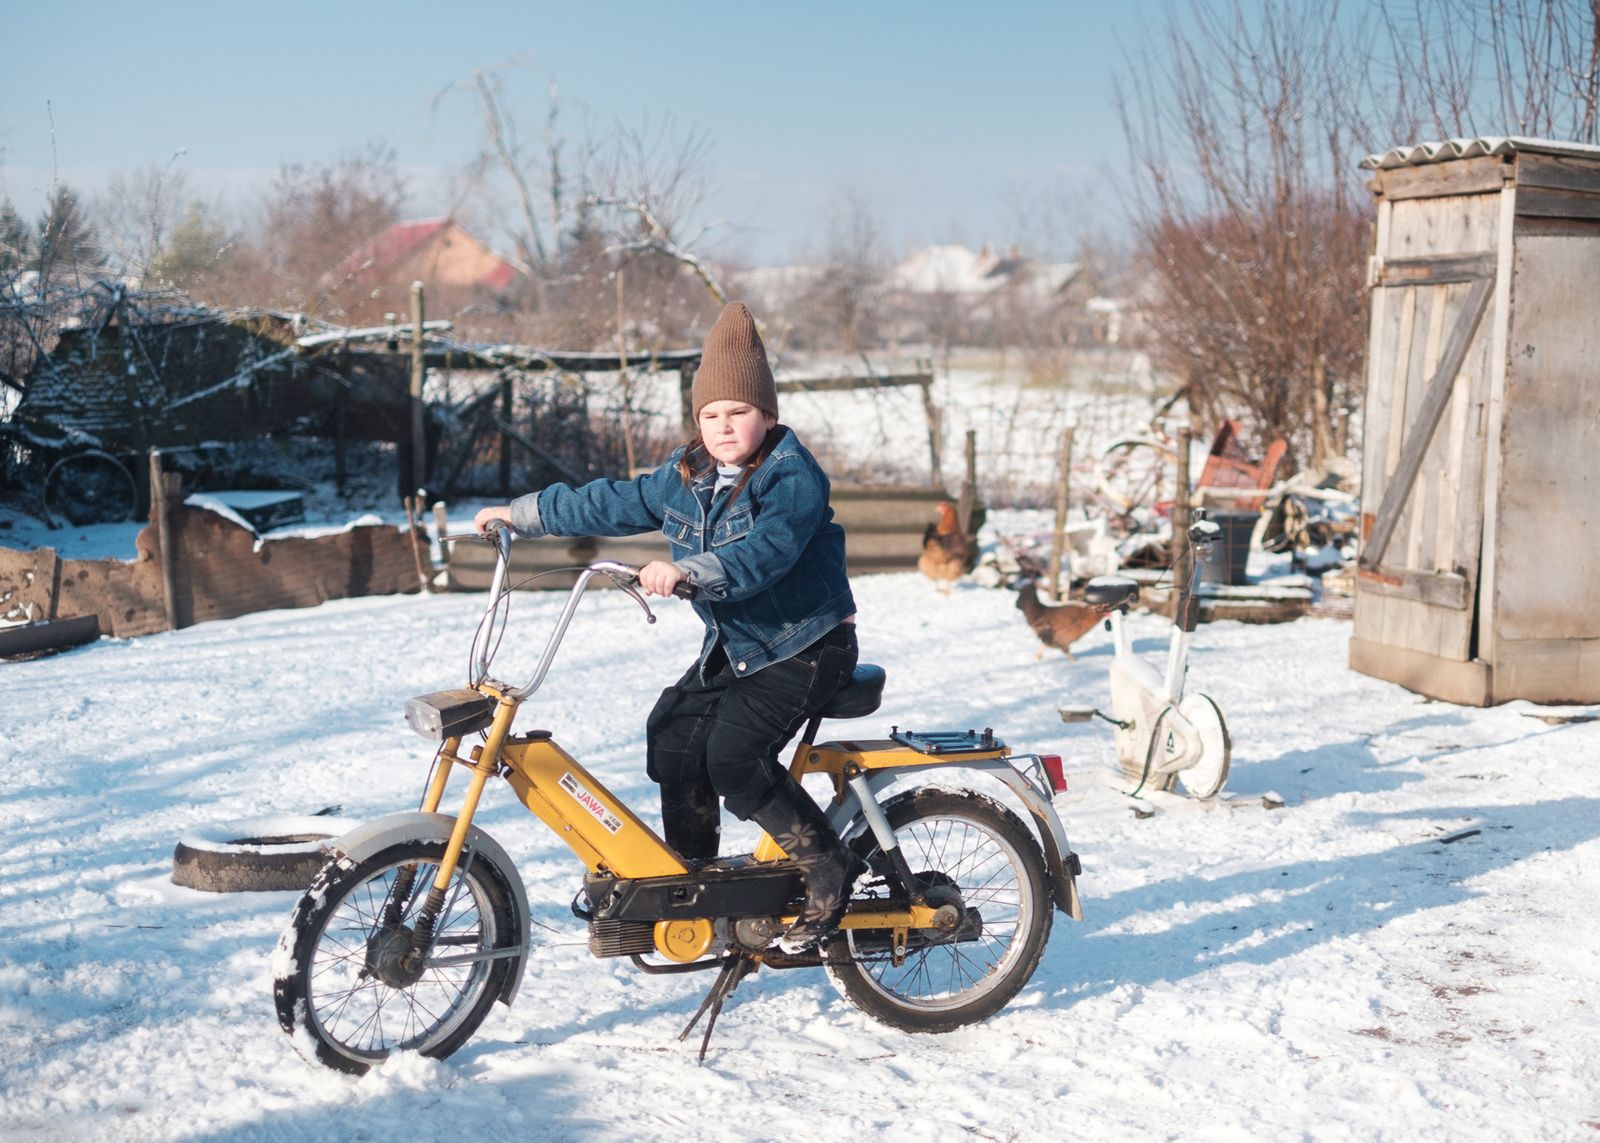 János Szabó Collects Stories of People Living Along a Hungarian River Full of Childhood Memories